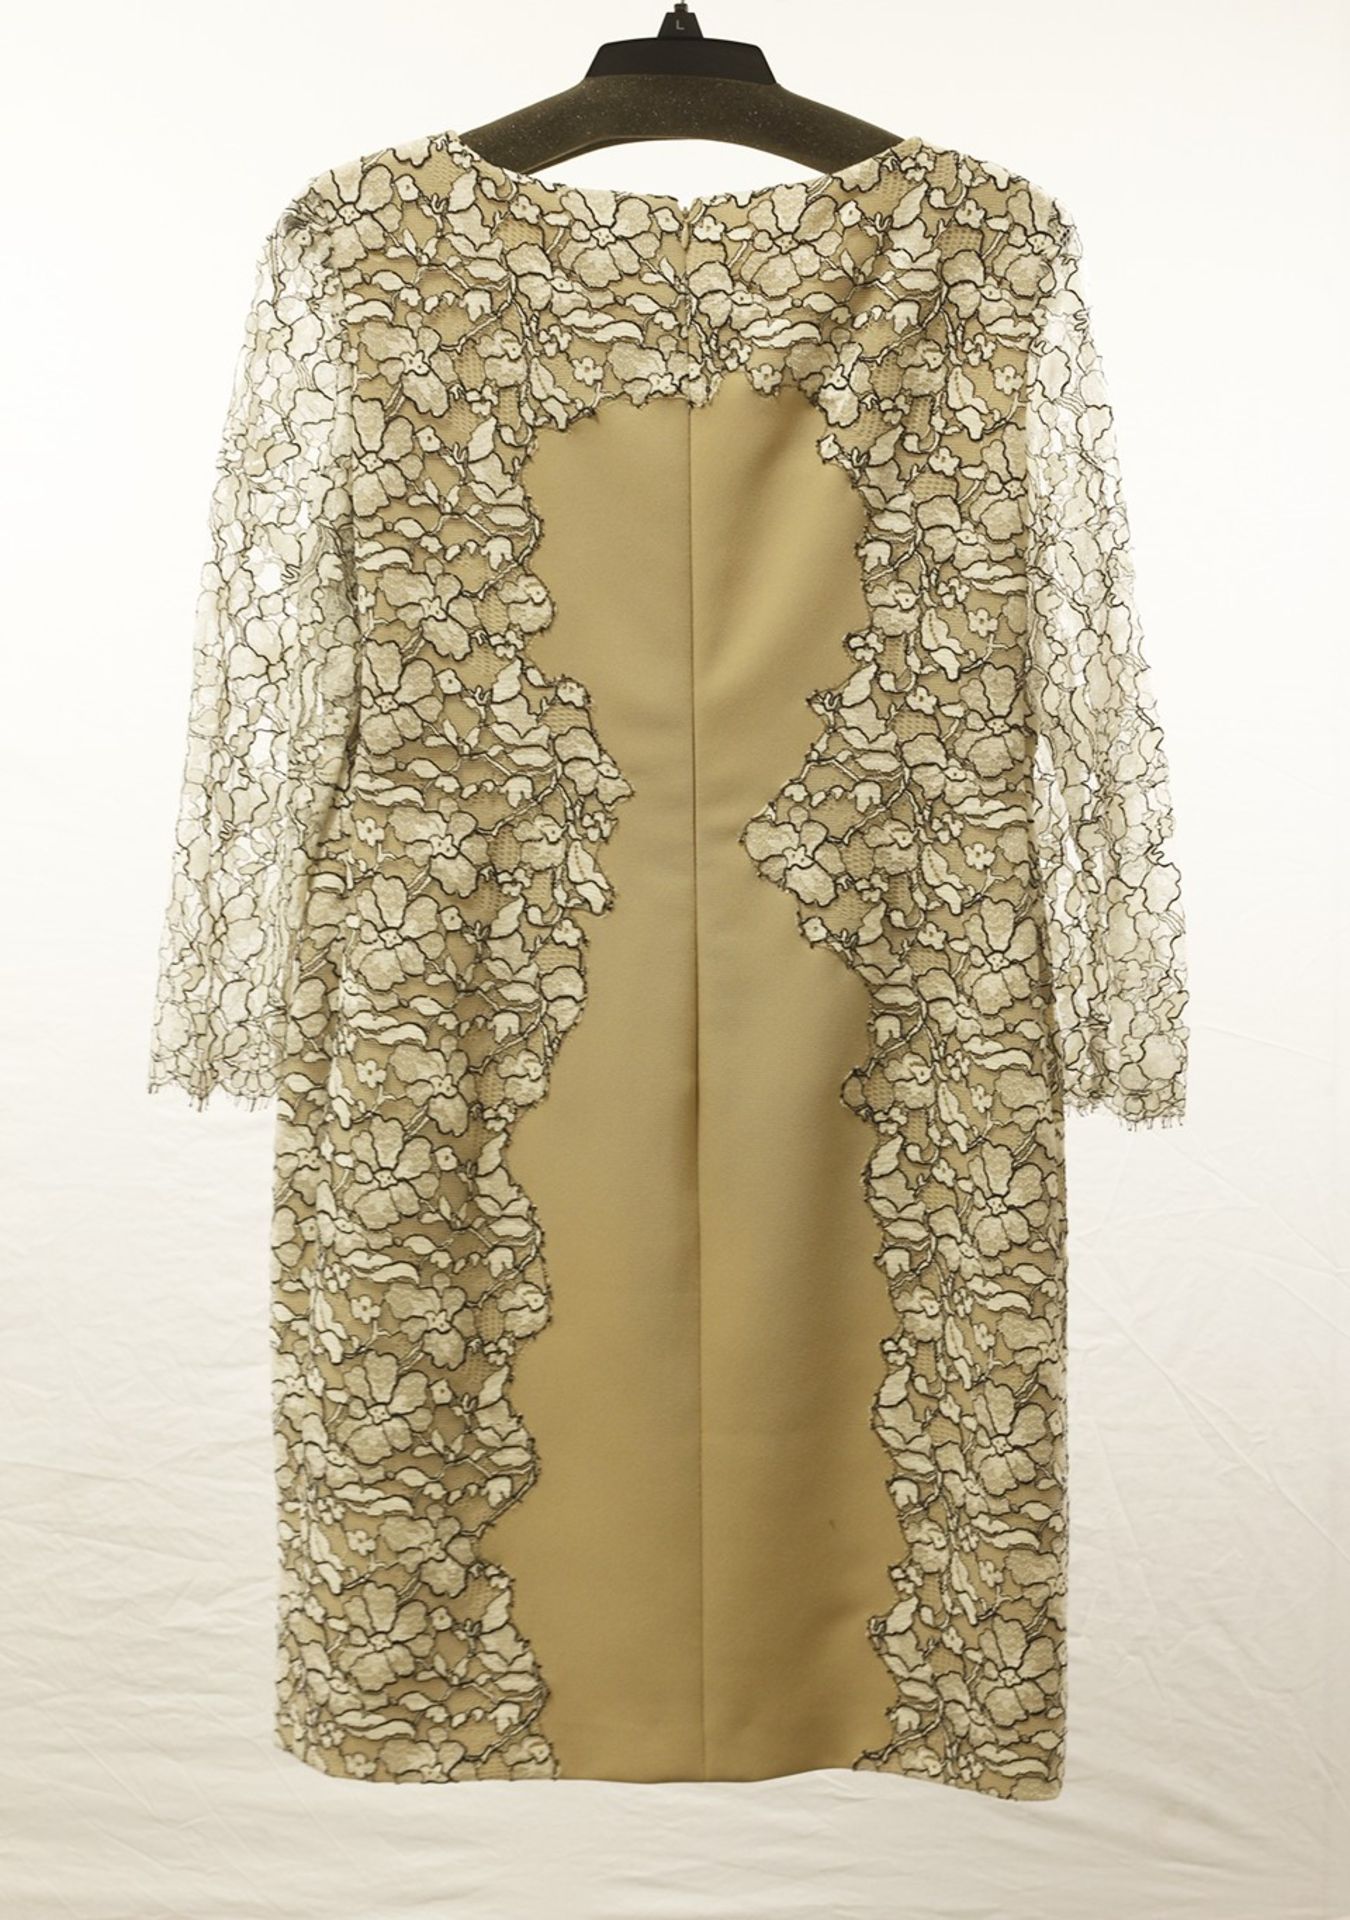 1 x Anne Belin Beige Dress - Size: 16 - Material: 100% Polyester - From a High End Clothing Boutique - Image 2 of 9